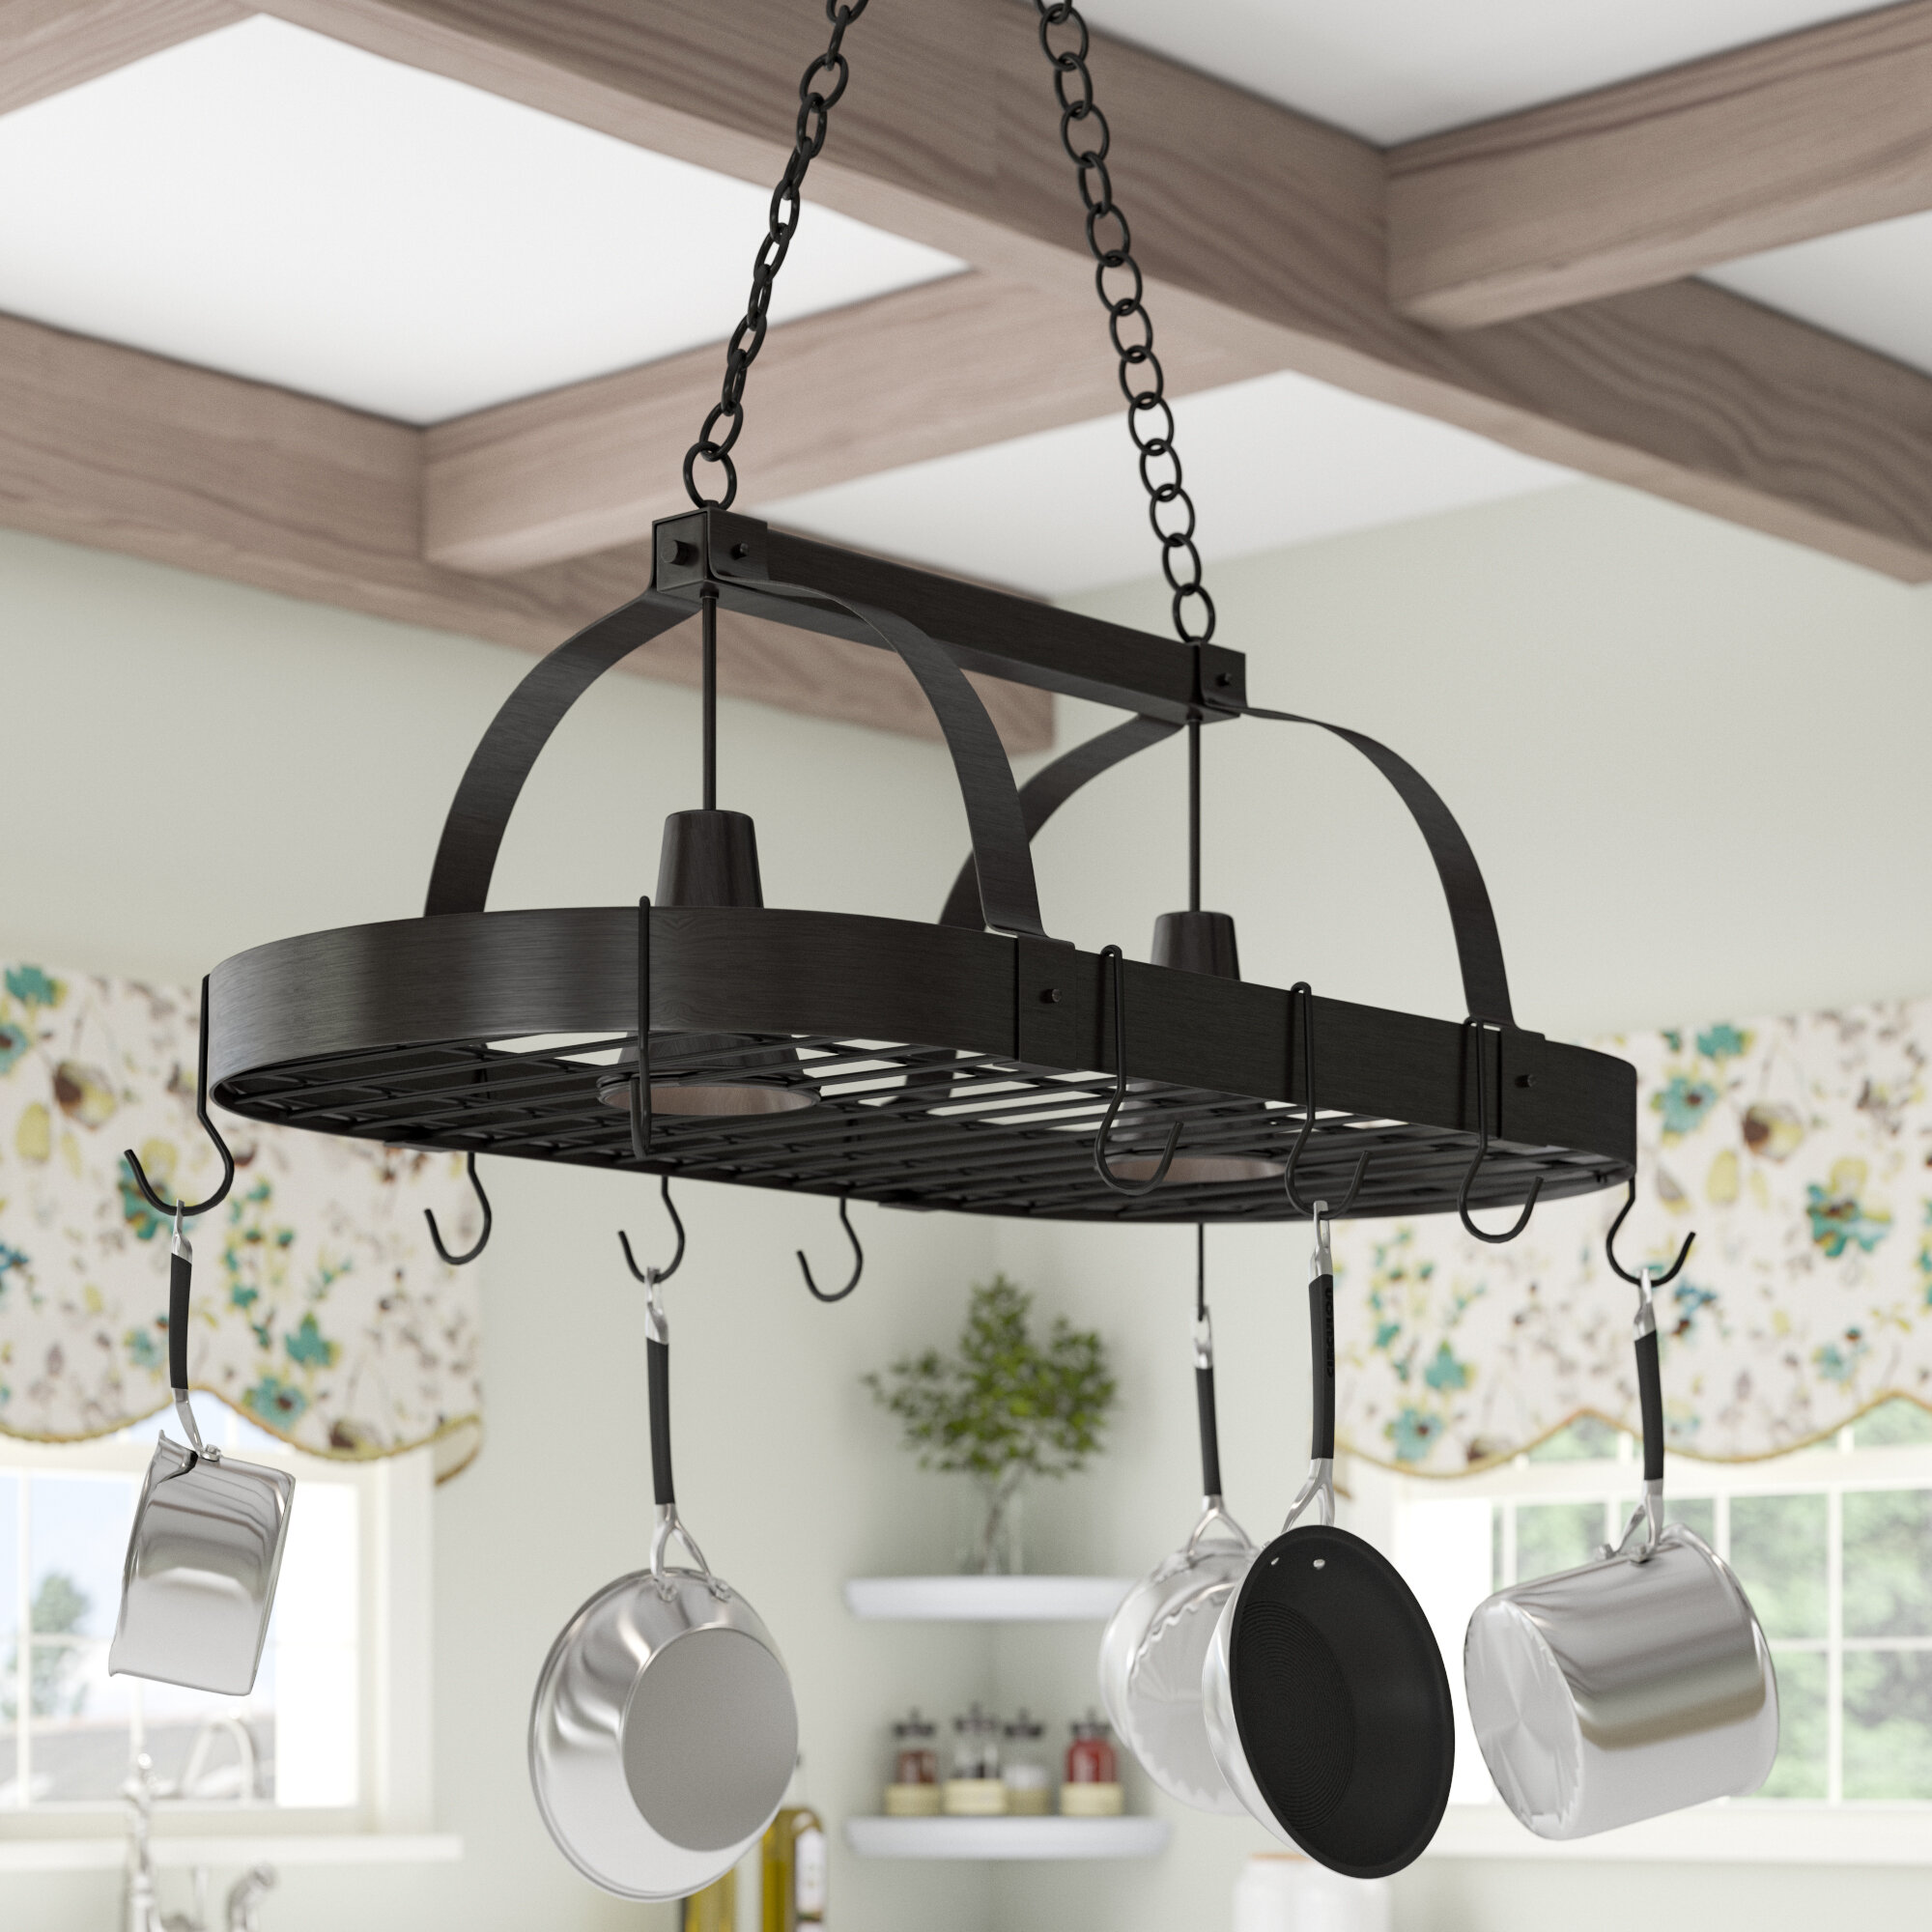 4 Rungs Small Square Ceiling Mounted Pot Rack Hang Kitchen